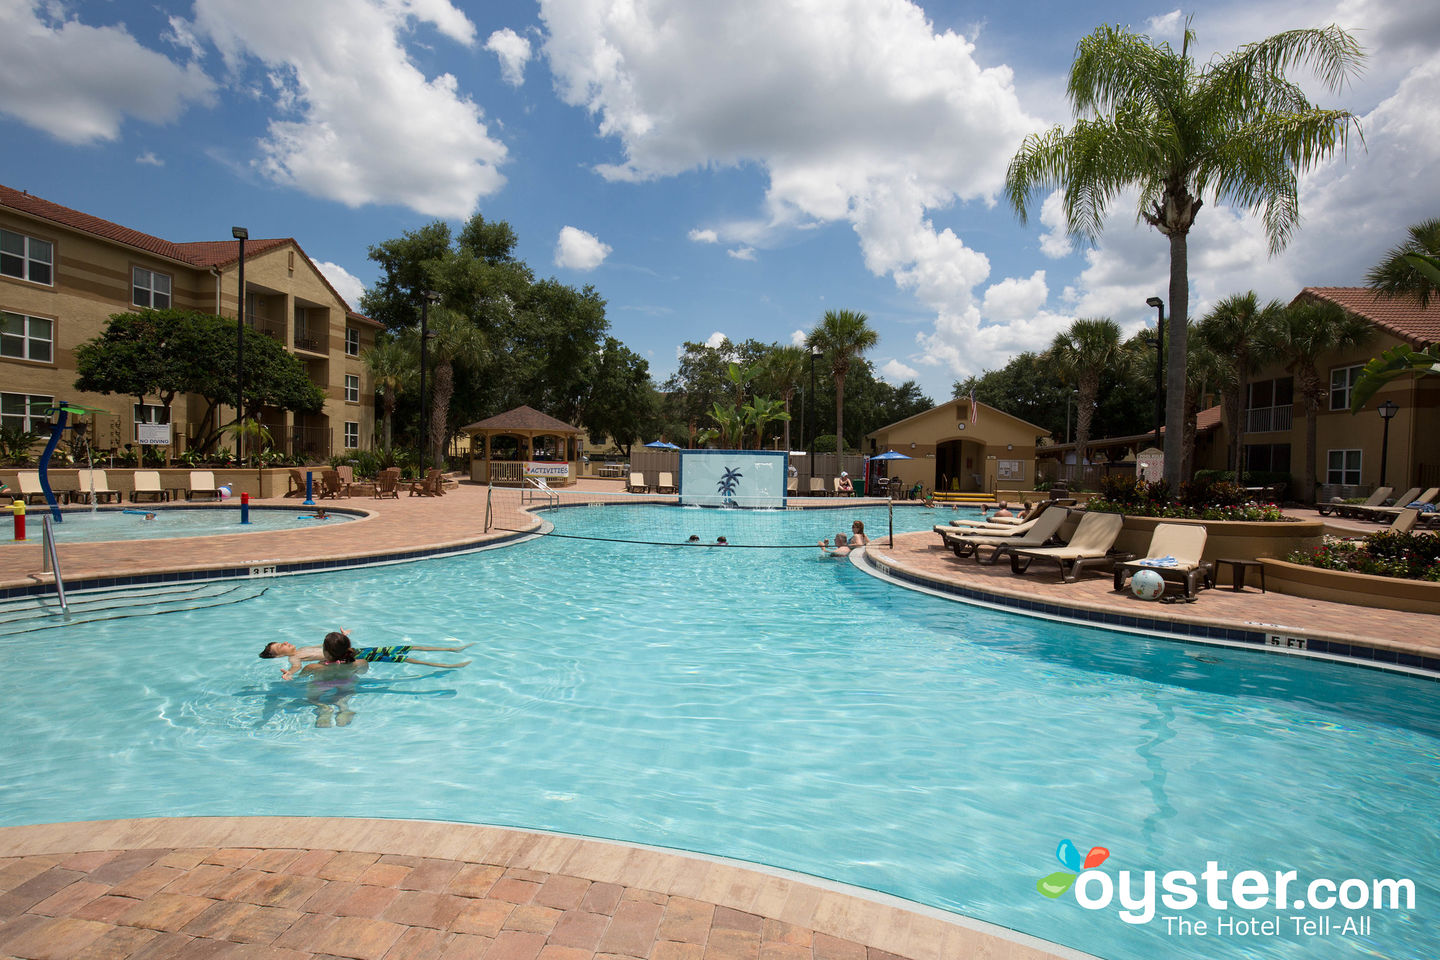 Blue Tree Resort At Lake Buena Vista Review What To Really Expect If You Stay